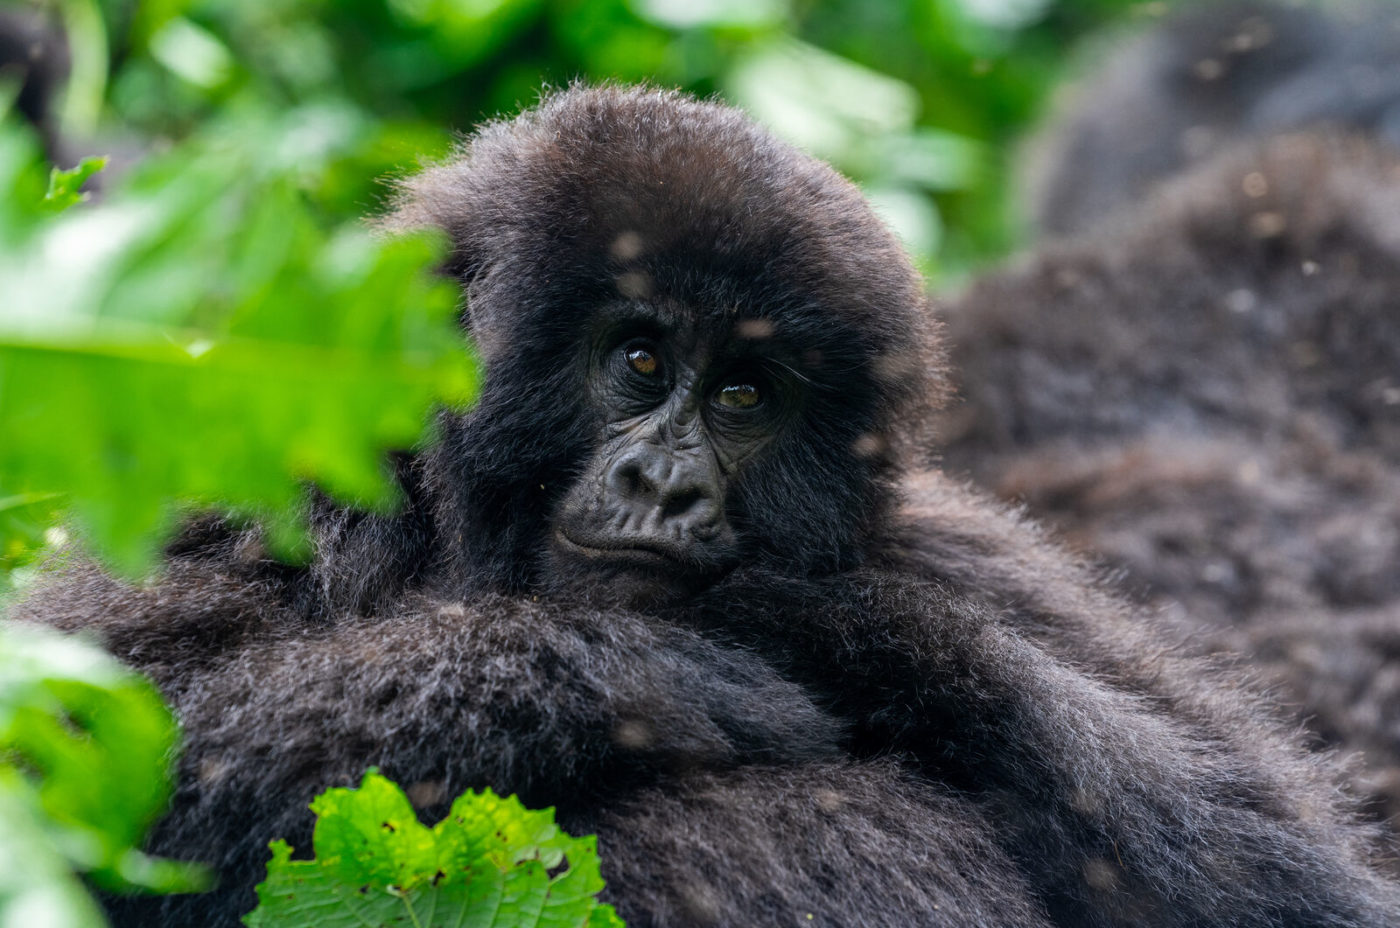 An image of a baby gorilla in the rainforest